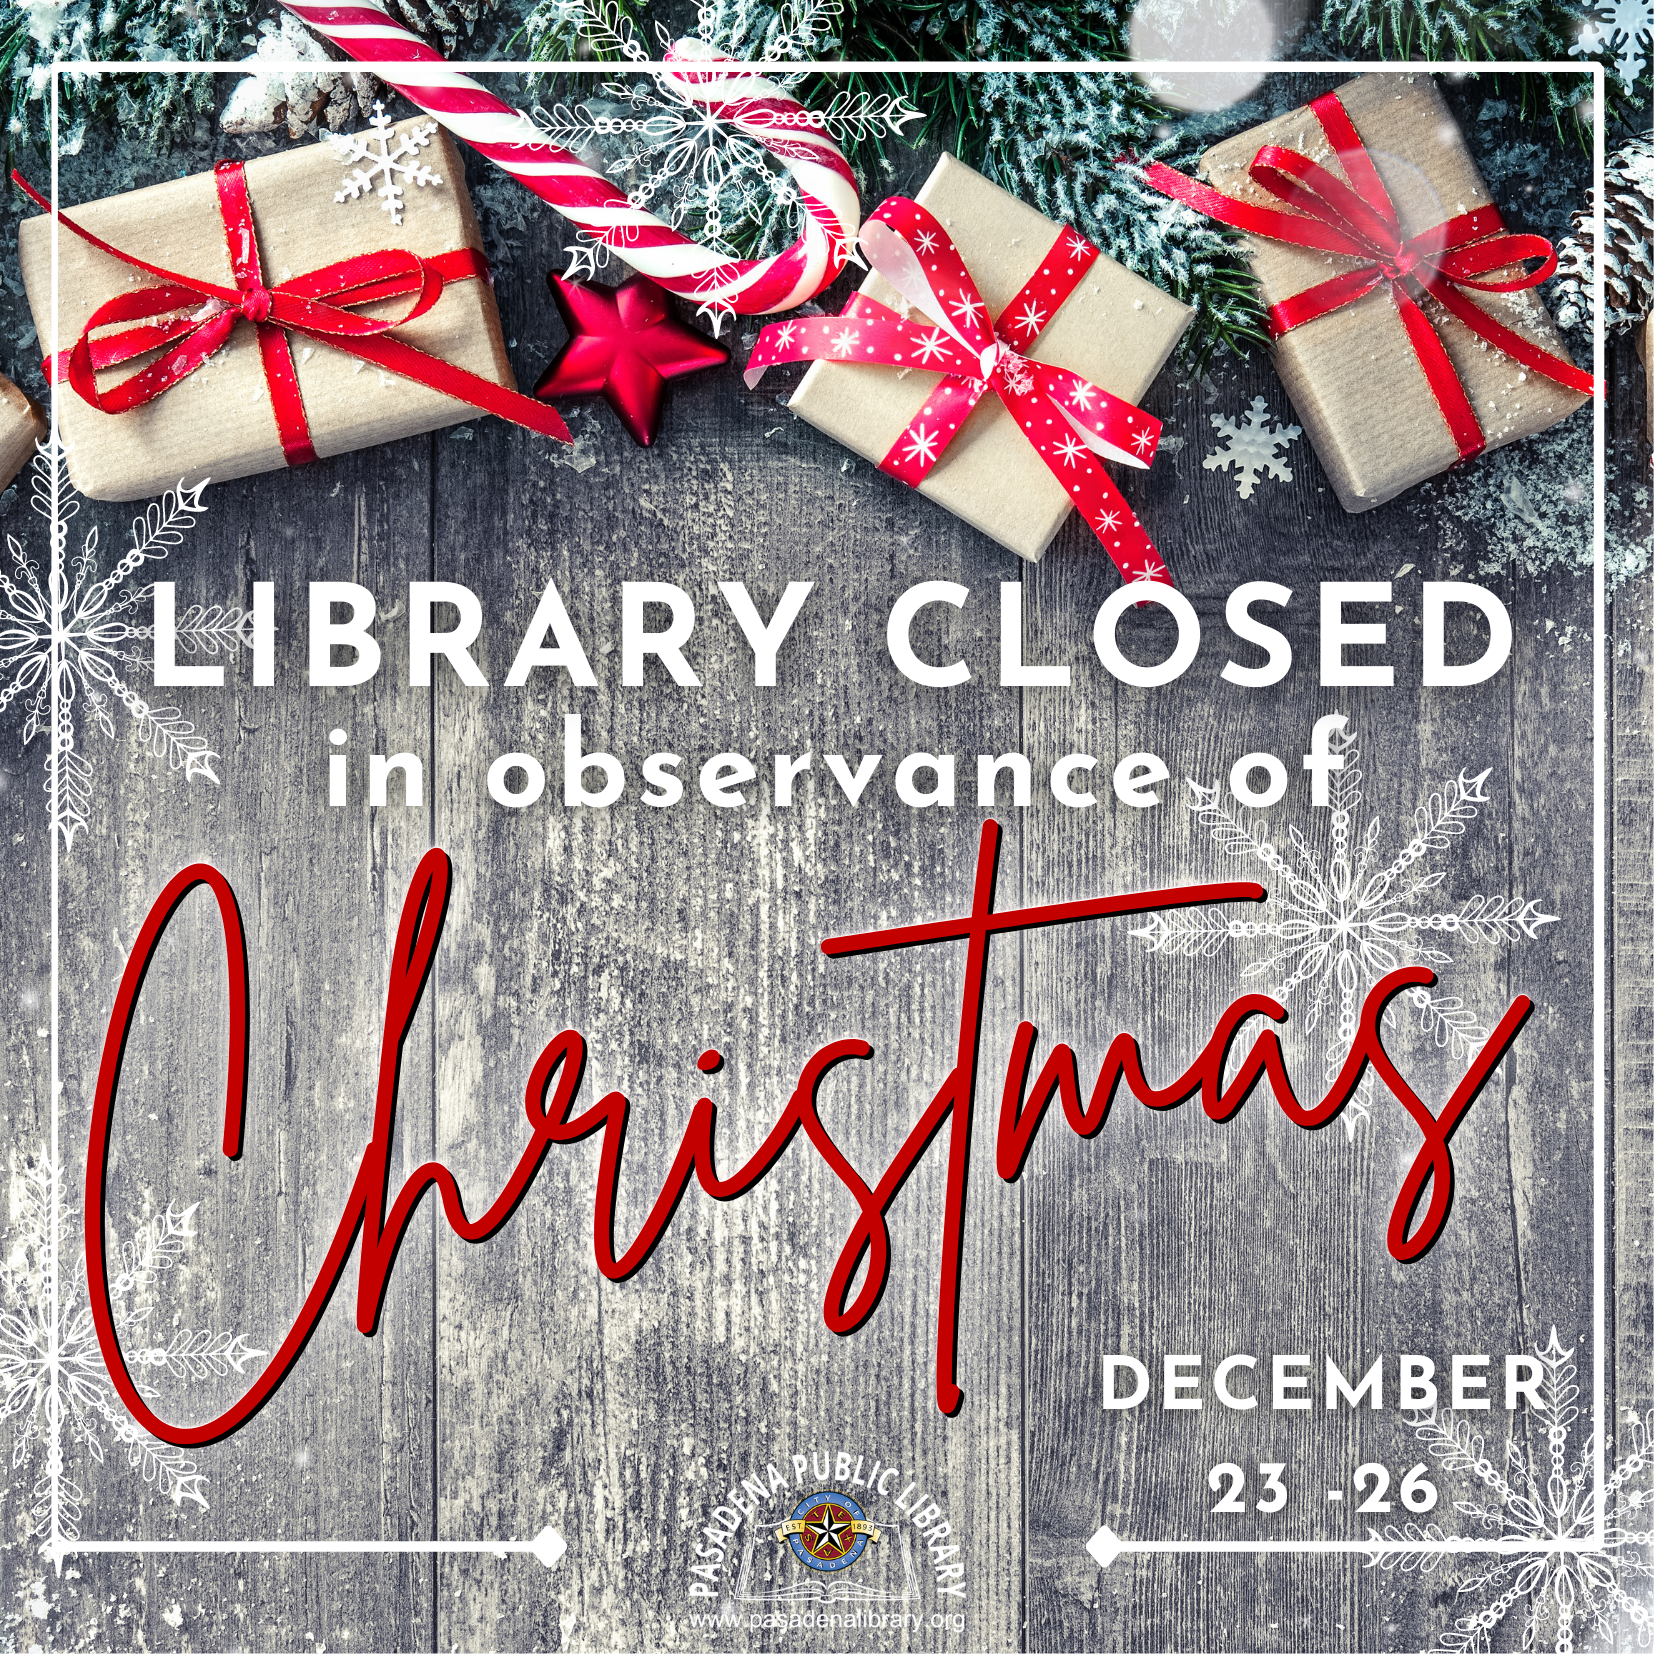 The Pasadena Public Library will be CLOSED Friday, December 23 through Monday, December 26 in observance of CHRISTMAS!  Library locations will re-open on Tuesday, December 27 at 10:00AM.